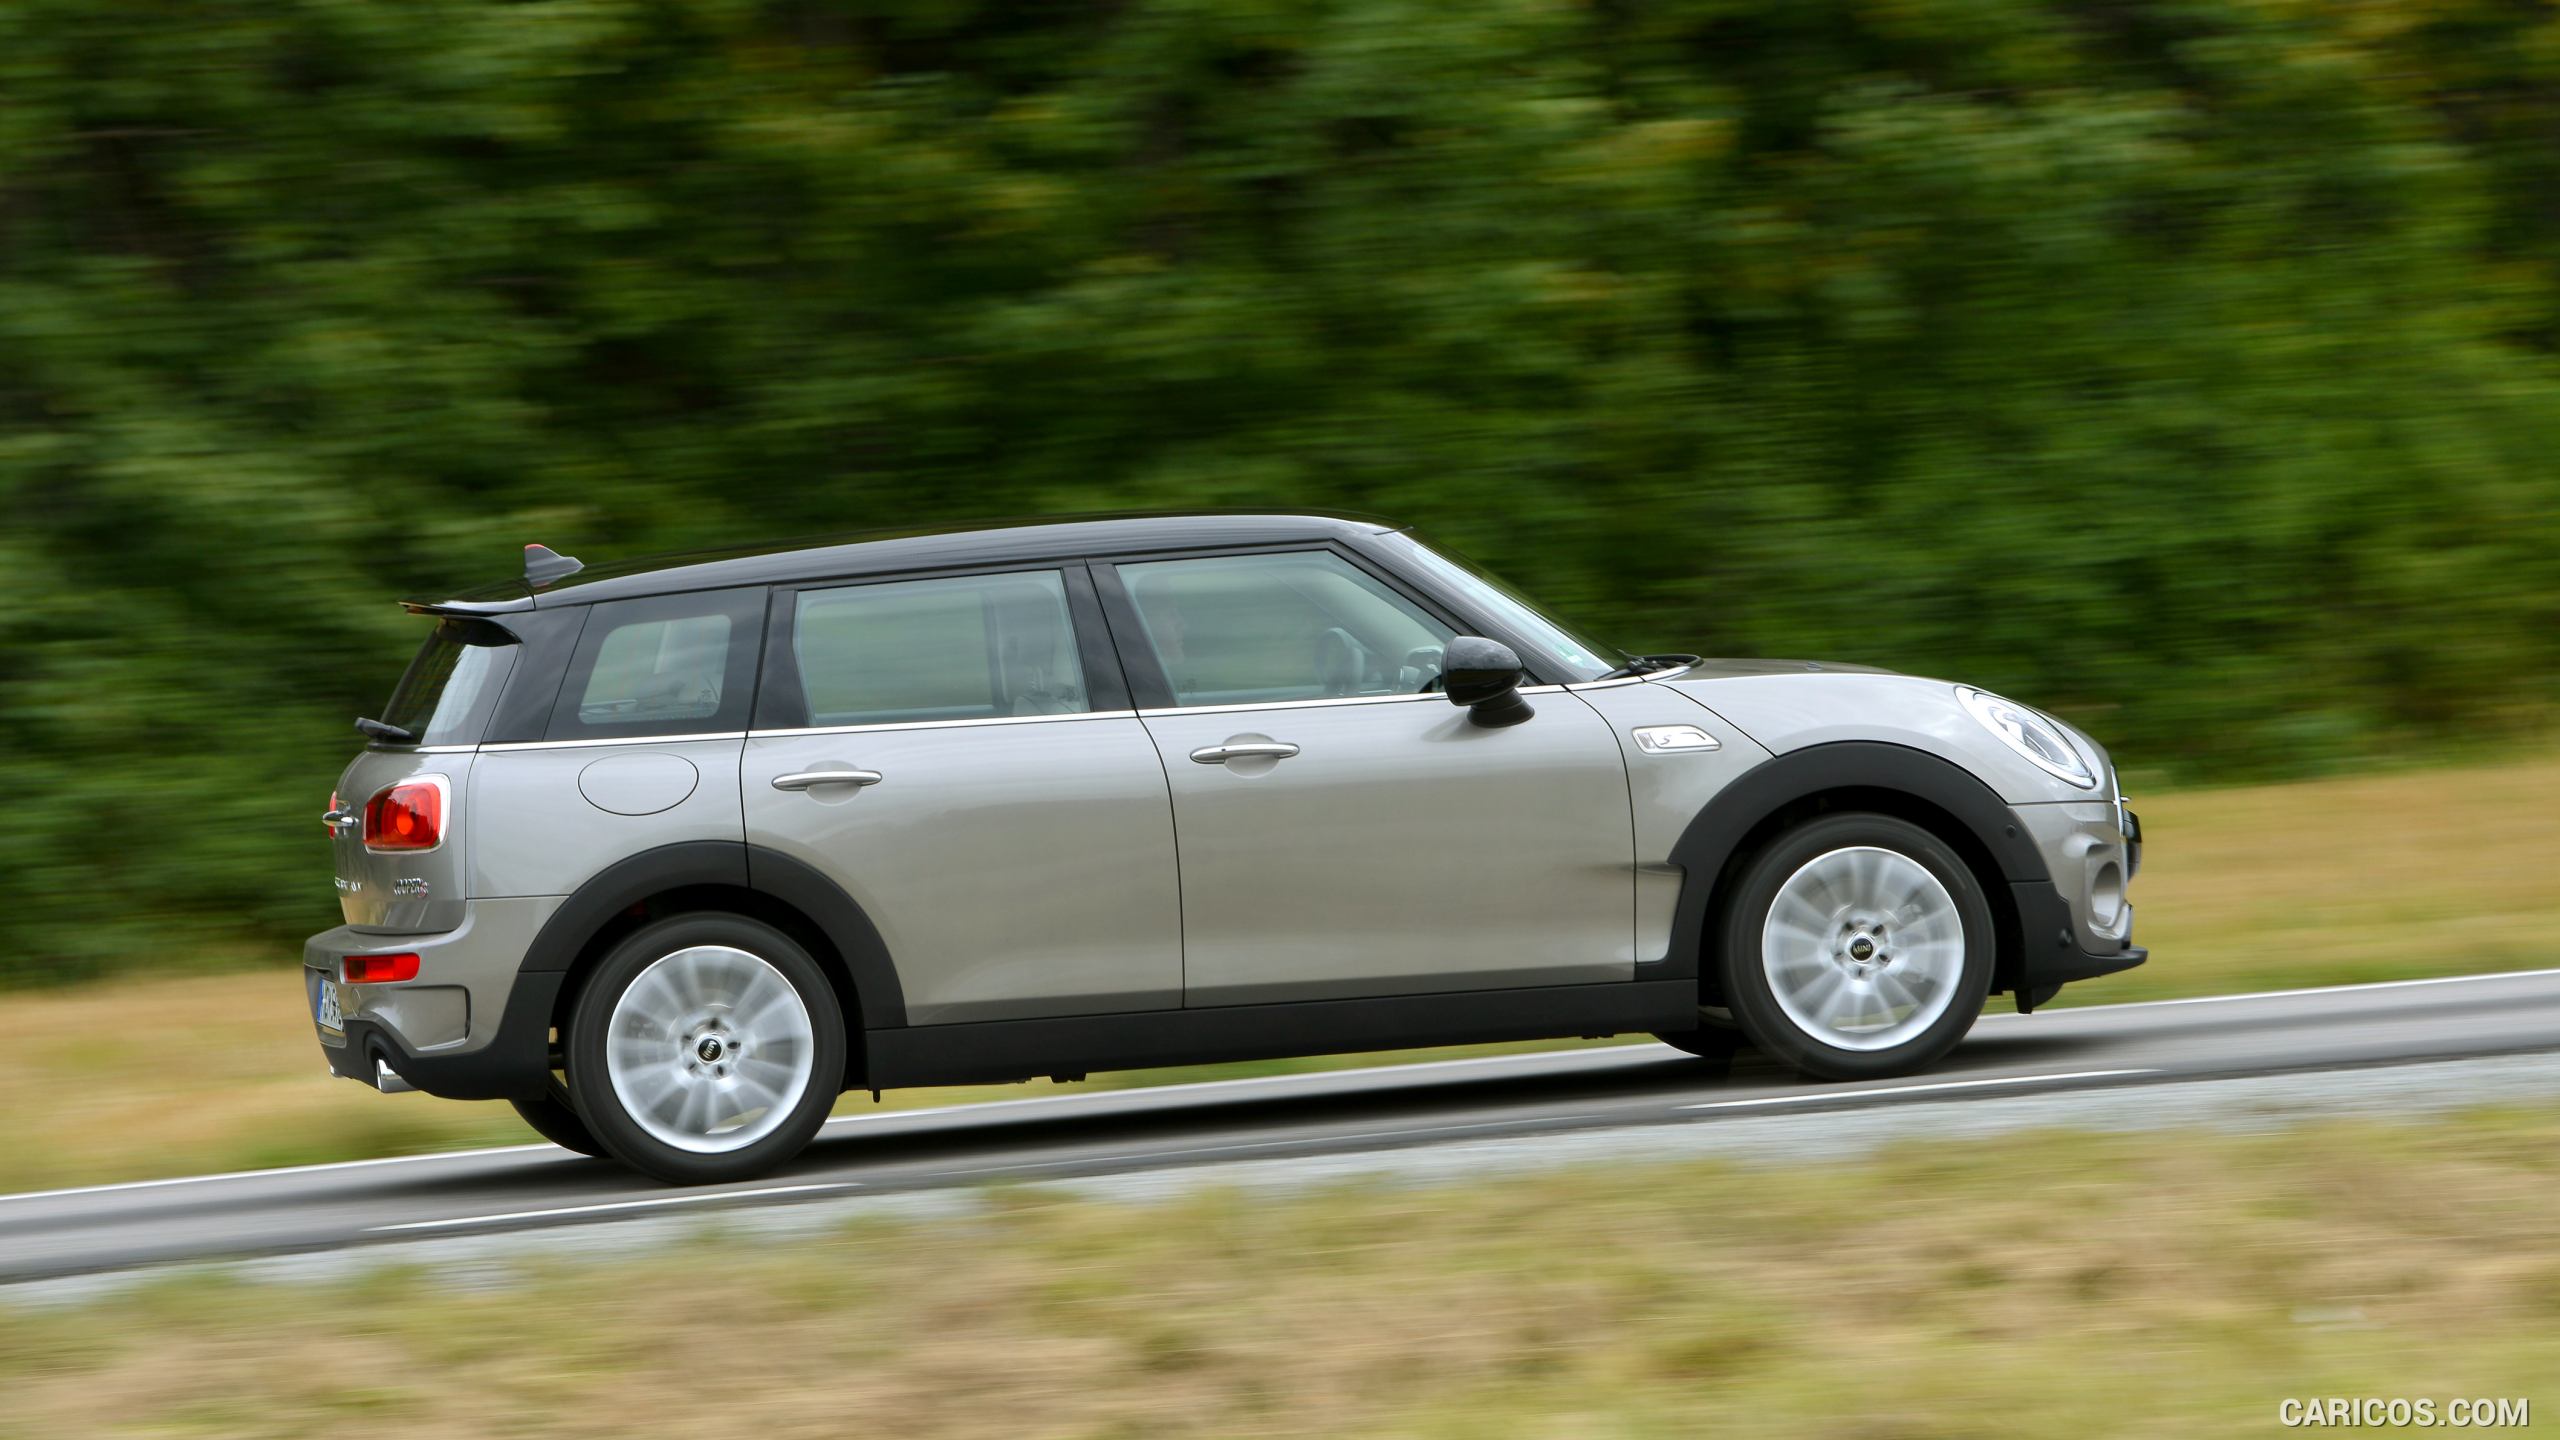 2016 MINI Cooper S Clubman in Metallic Melting Silver - Side, #156 of 380